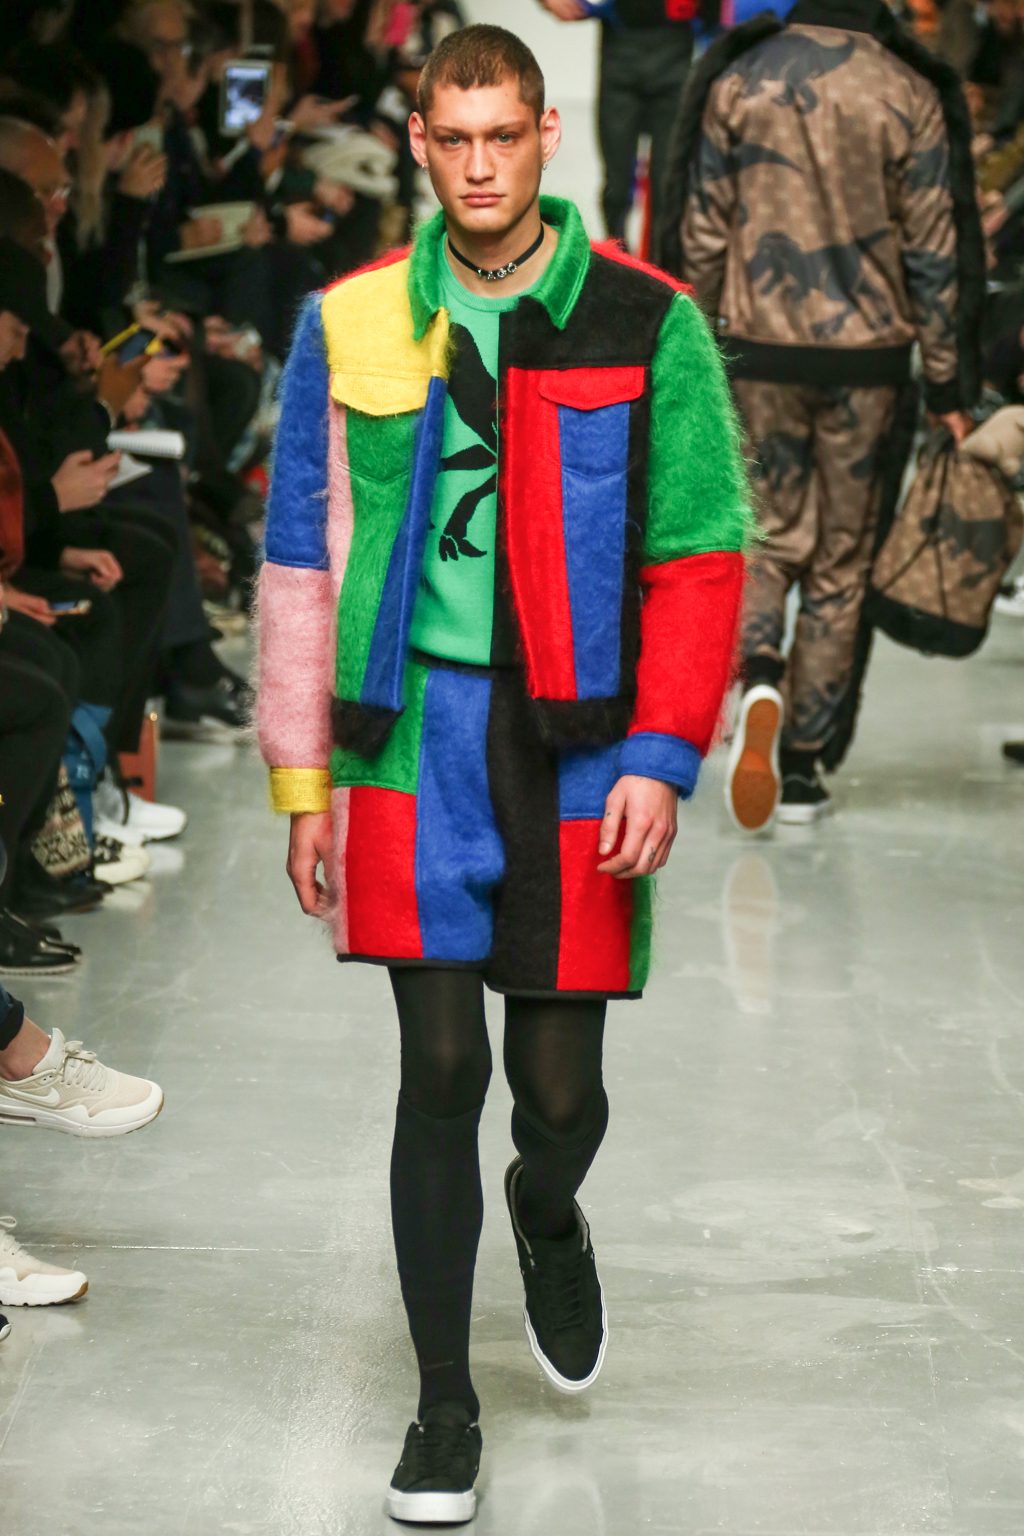 Hosiery For Men: Bobby Abley: tights for men at London Fashion Week Men's